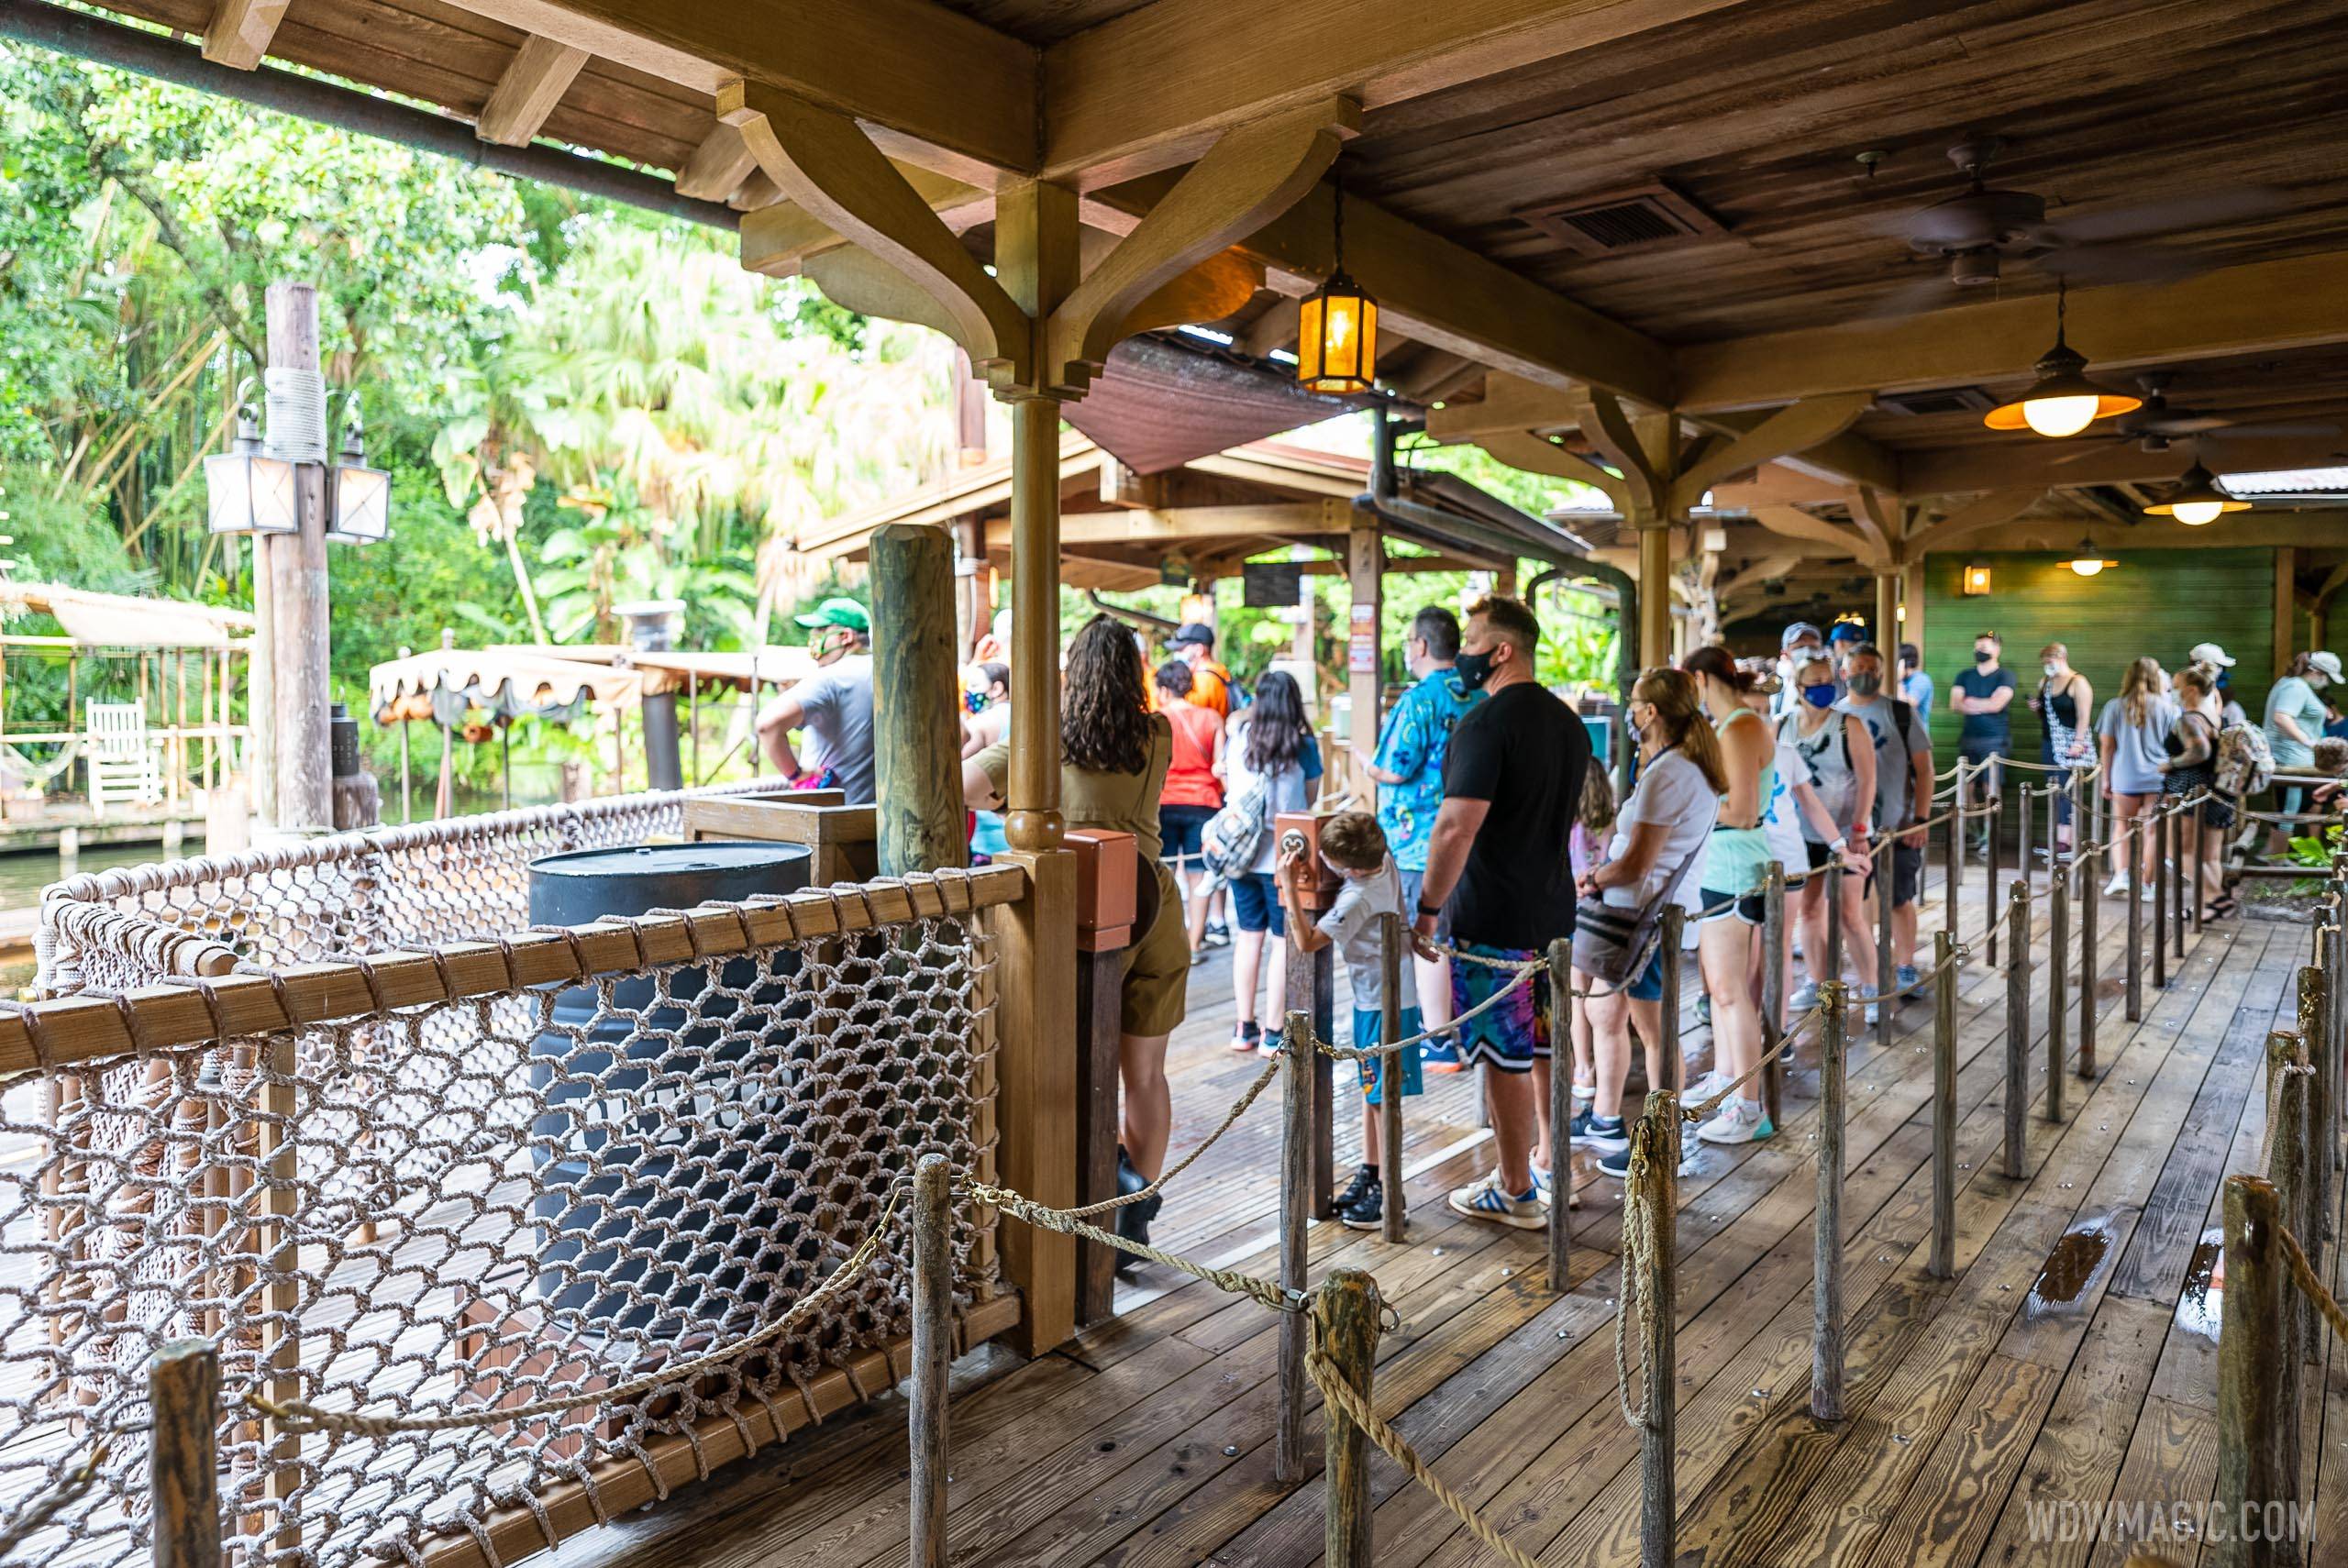 Physical distancing markers removed at Jungle Cruise